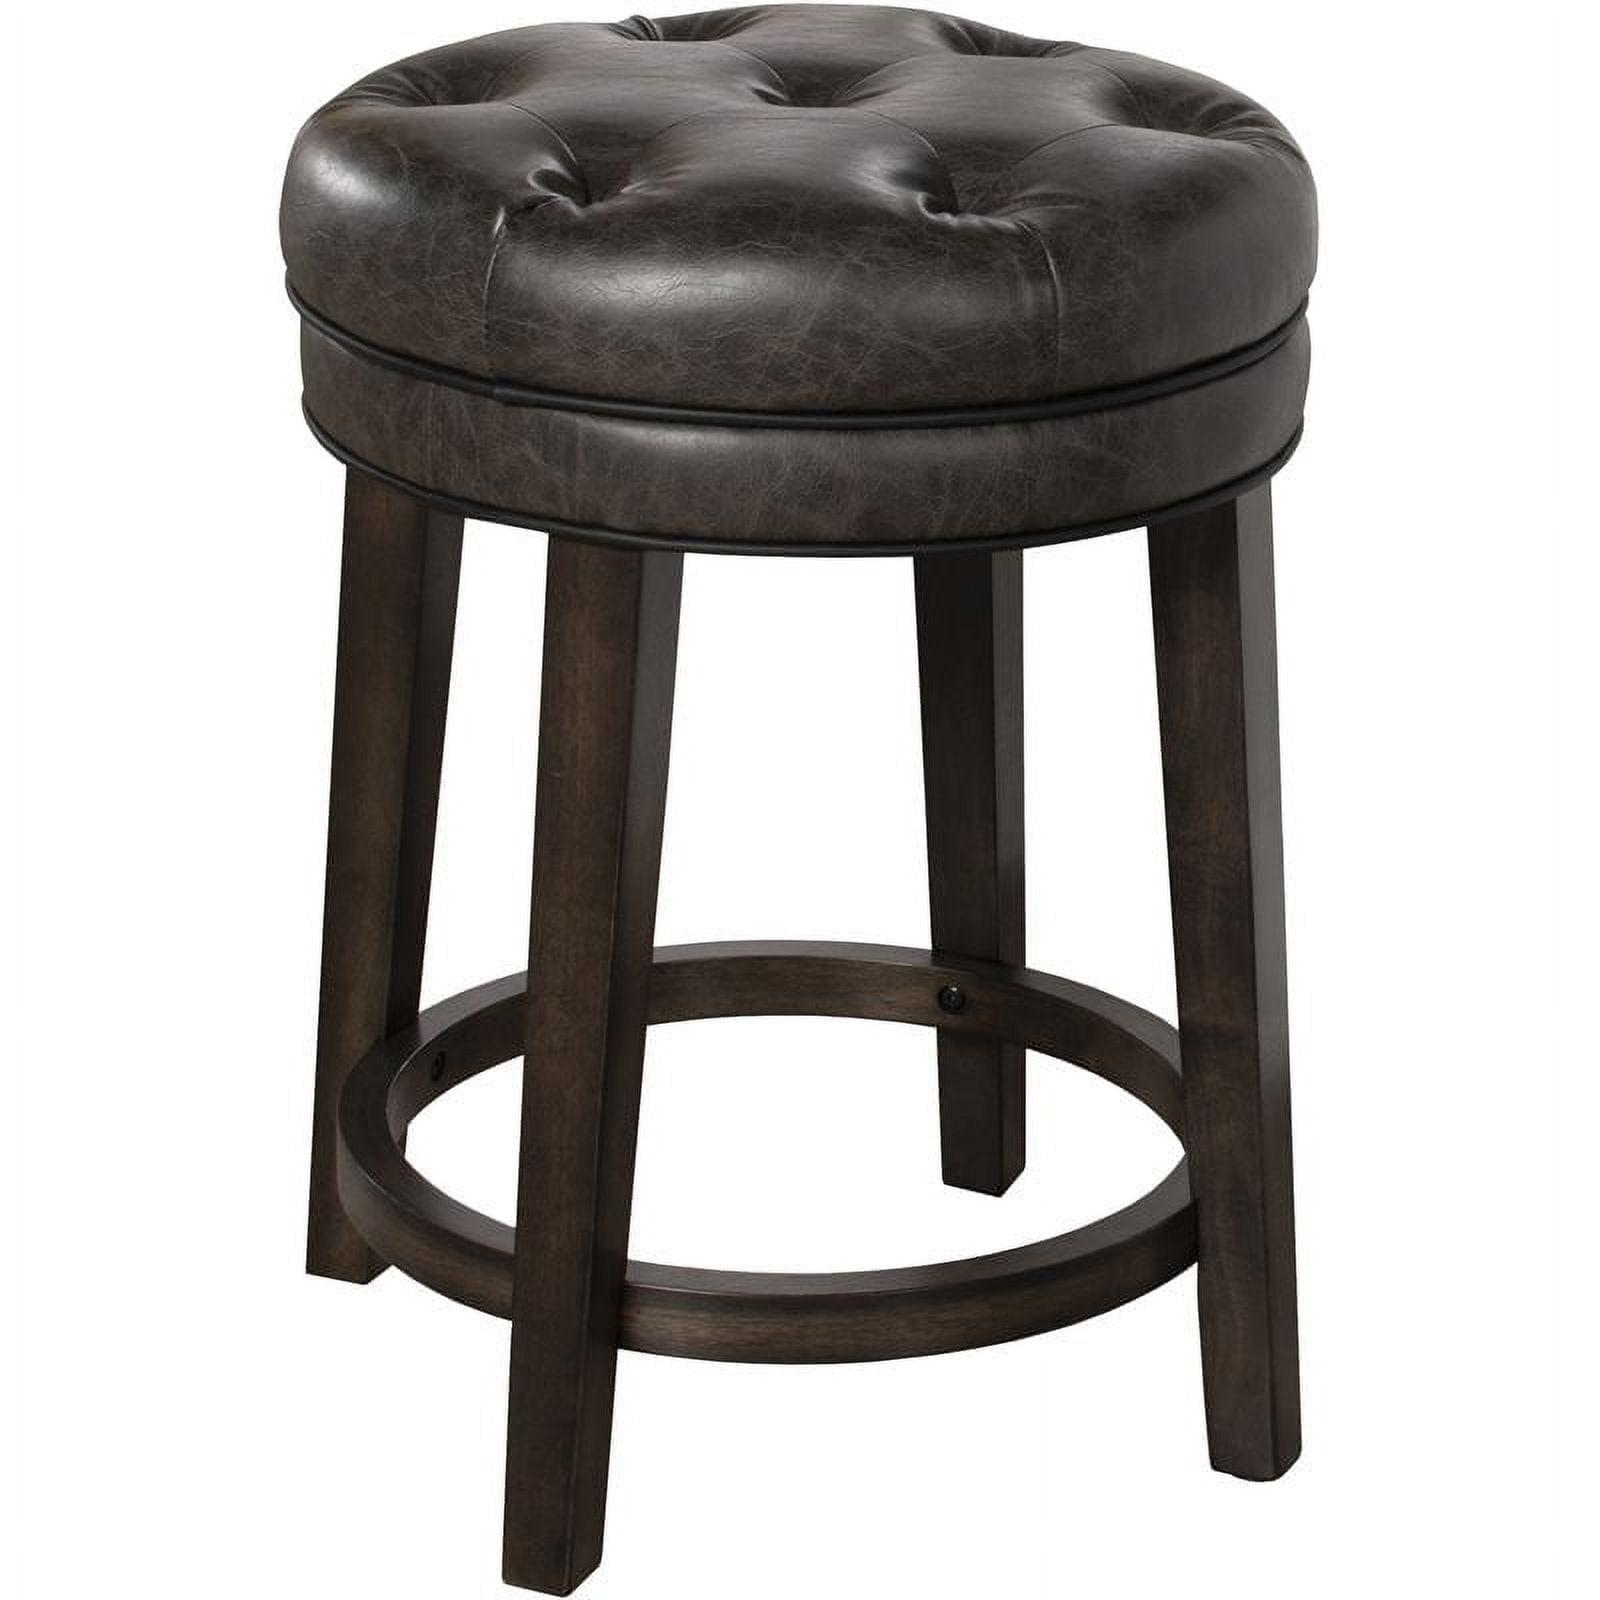 Classic Charcoal Gray Button-Tufted Leather Swivel Counter Stool